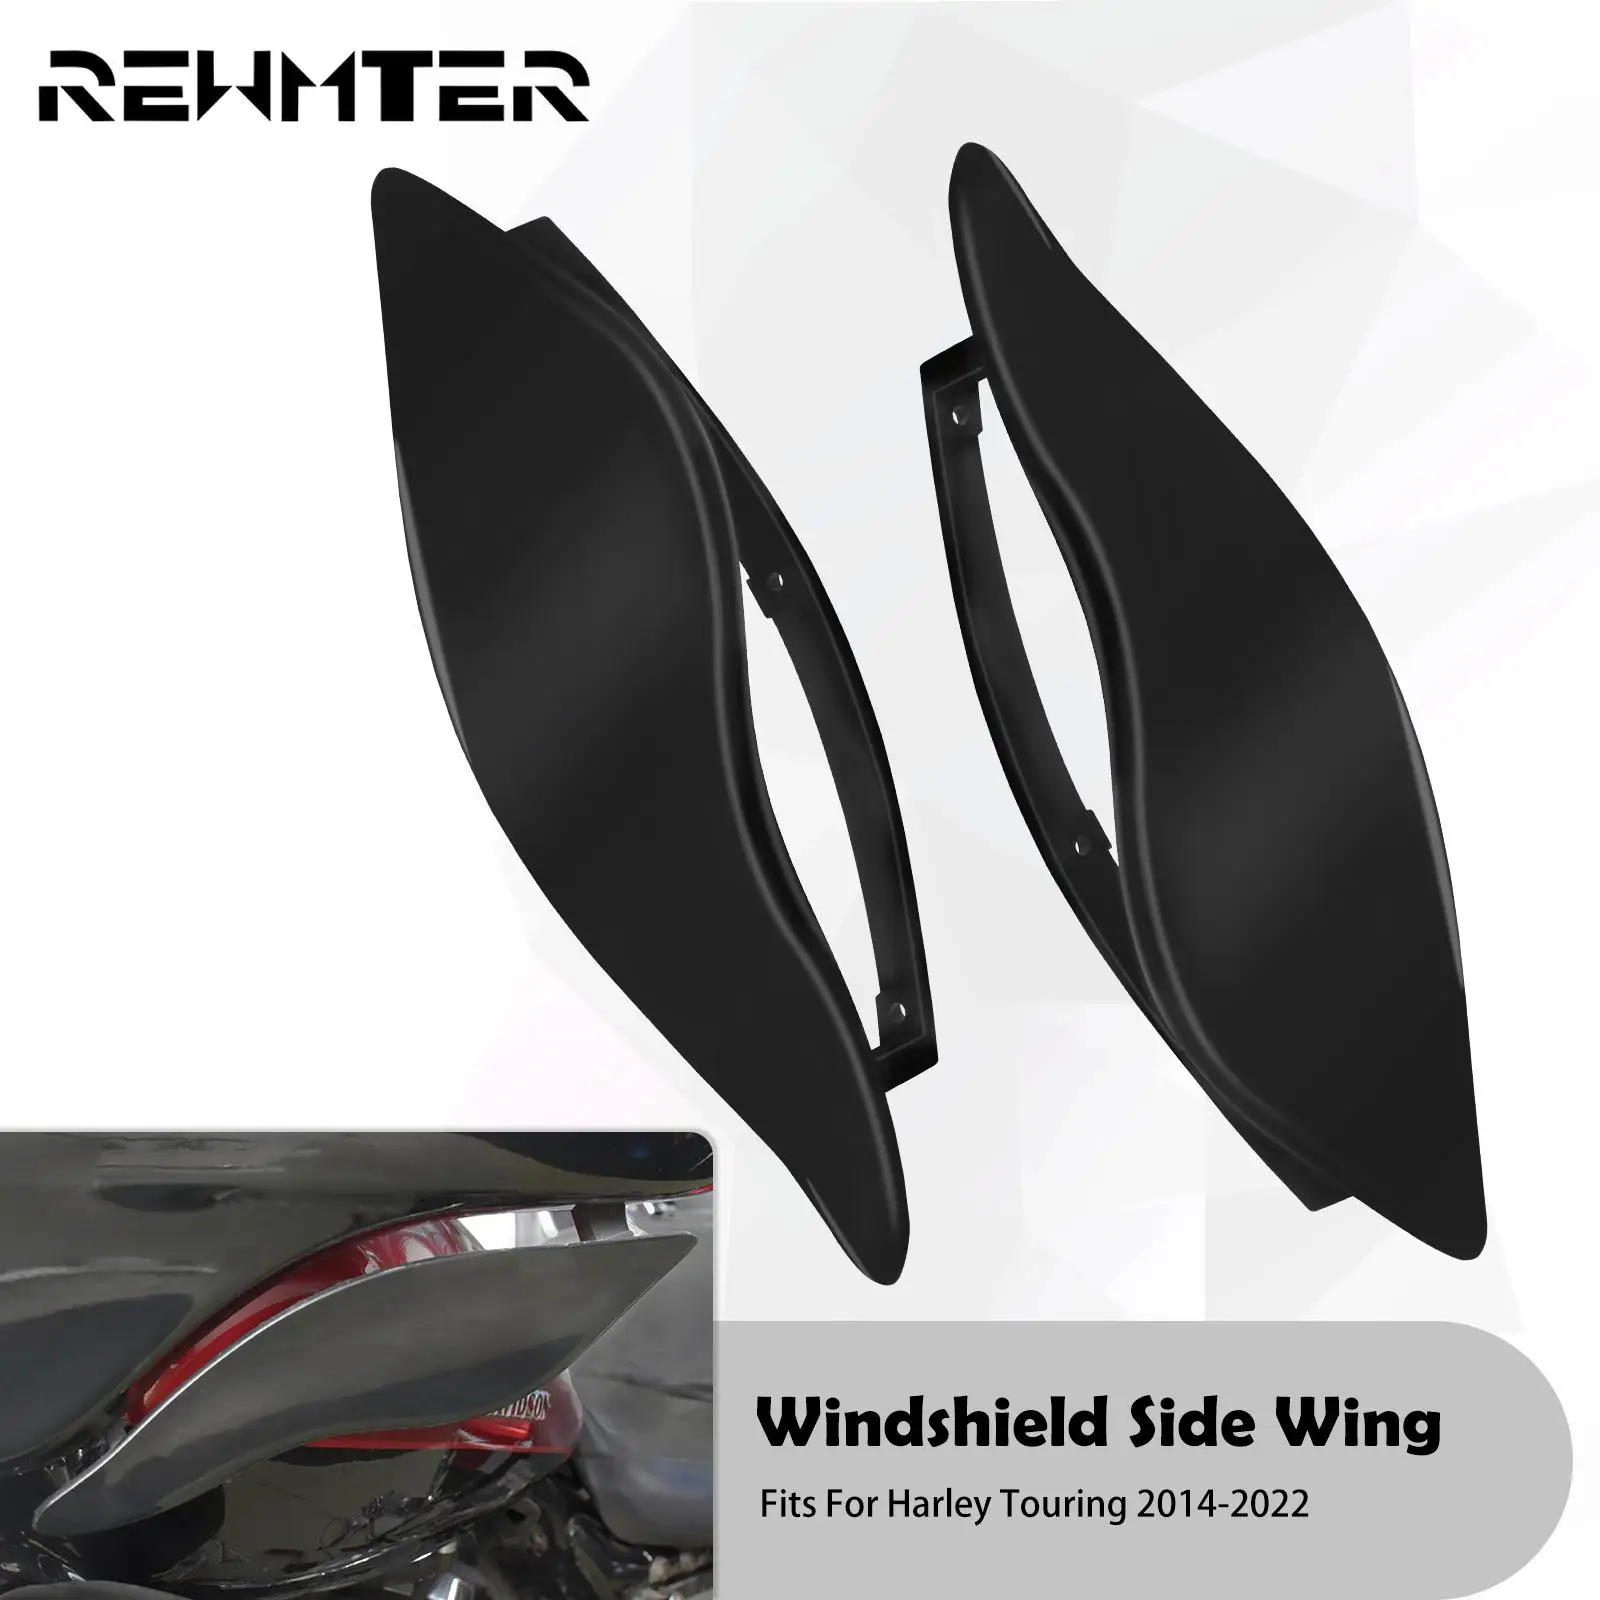 TCMT Windshield Clear Side Wings Air Deflectors Fits For Harley Touring Street Glide 2014 2015 2016 2017 2018 